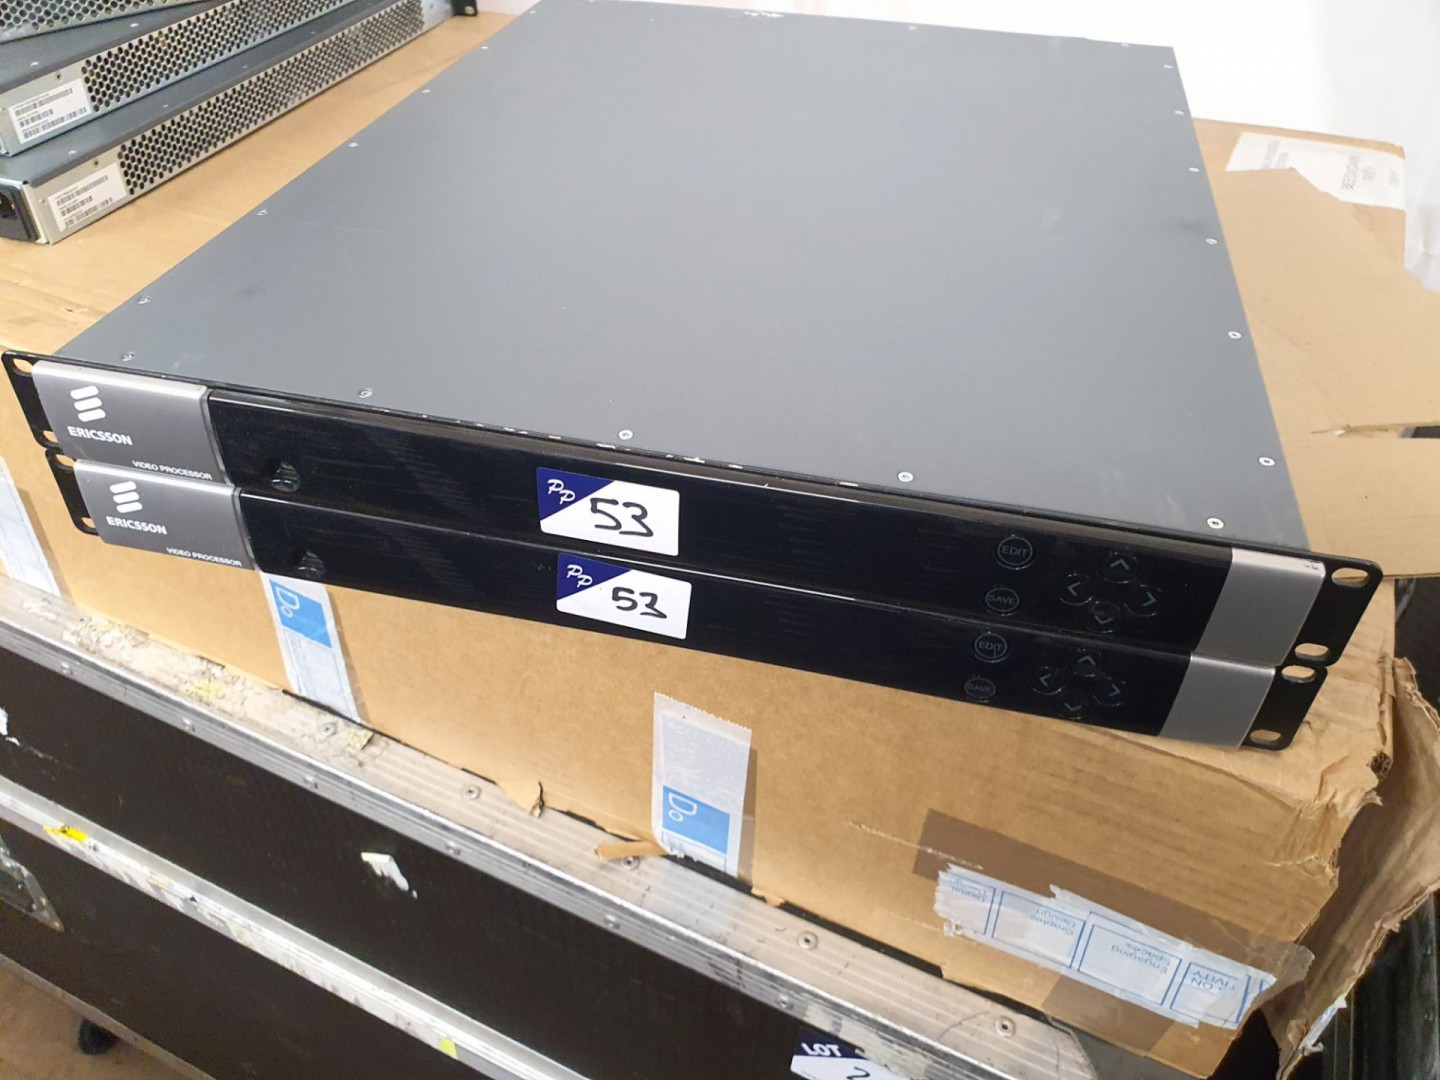 2x Ericsson video processors with 4x EN7190 HD tra...